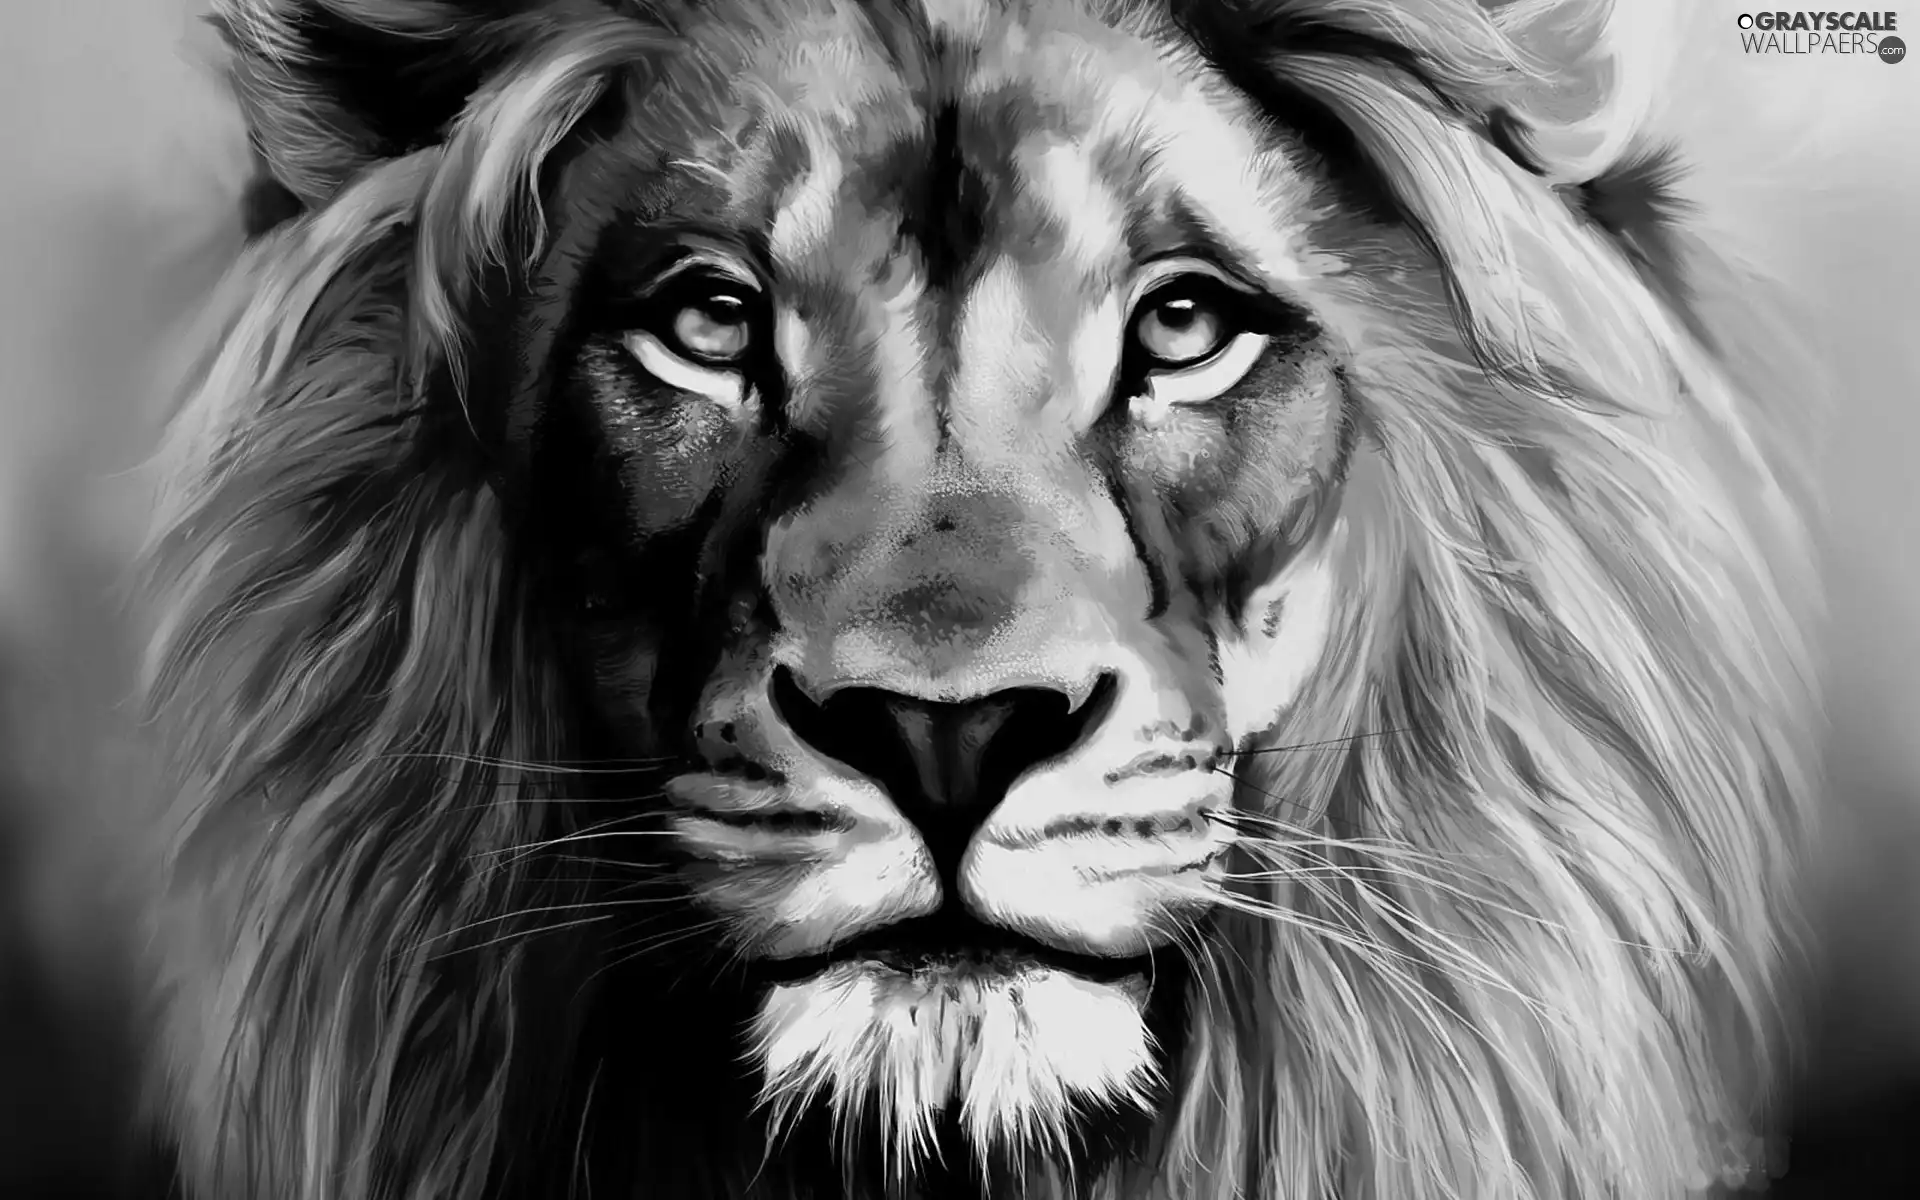 grayscale-computer-lion-graphics-1920x1200